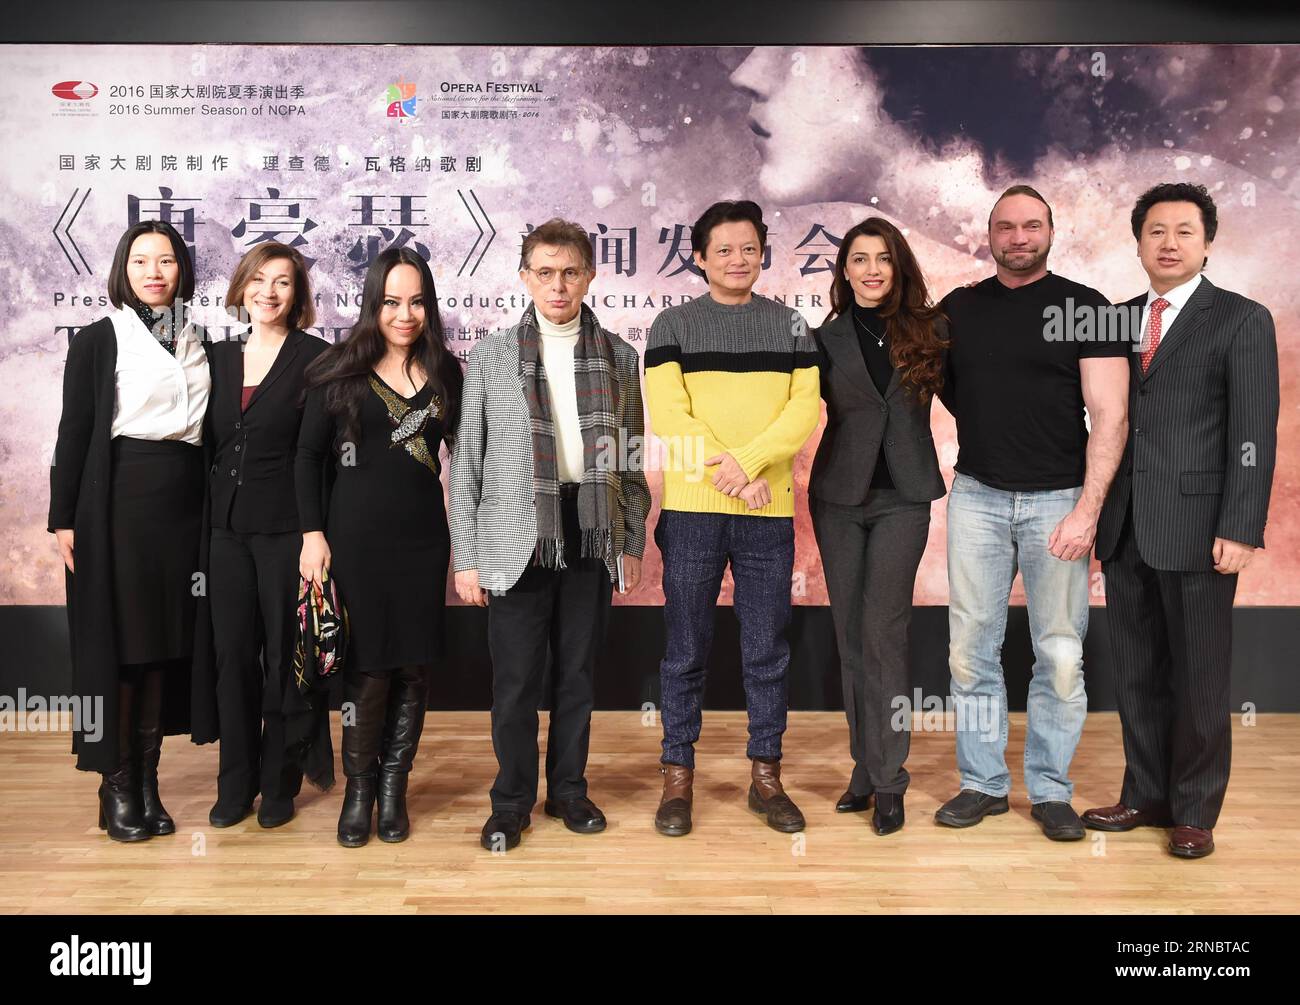 (160311) -- BEIJING, March 11, 2016 -- Director Peir Alli (4th L) and leading roles pose for a group photo during the press conference of newly composed Wagner opera Tannhauser at the National Center for the Performing Arts (NCPA) in Beijing, capital of China, March 11, 2016. Tannhauser is the third Wagner opera presented by NCPA. The opera will make its debut on April 6. ) (yxb) CHINA-BEIJING-NCPA-WAGNER-OPERA-TANNHAUSER (CN) LuoxXiaoguang PUBLICATIONxNOTxINxCHN   Beijing March 11 2016 Director  Alli 4th l and Leading Roles Pose for a Group Photo during The Press Conference of newly composed Stock Photo